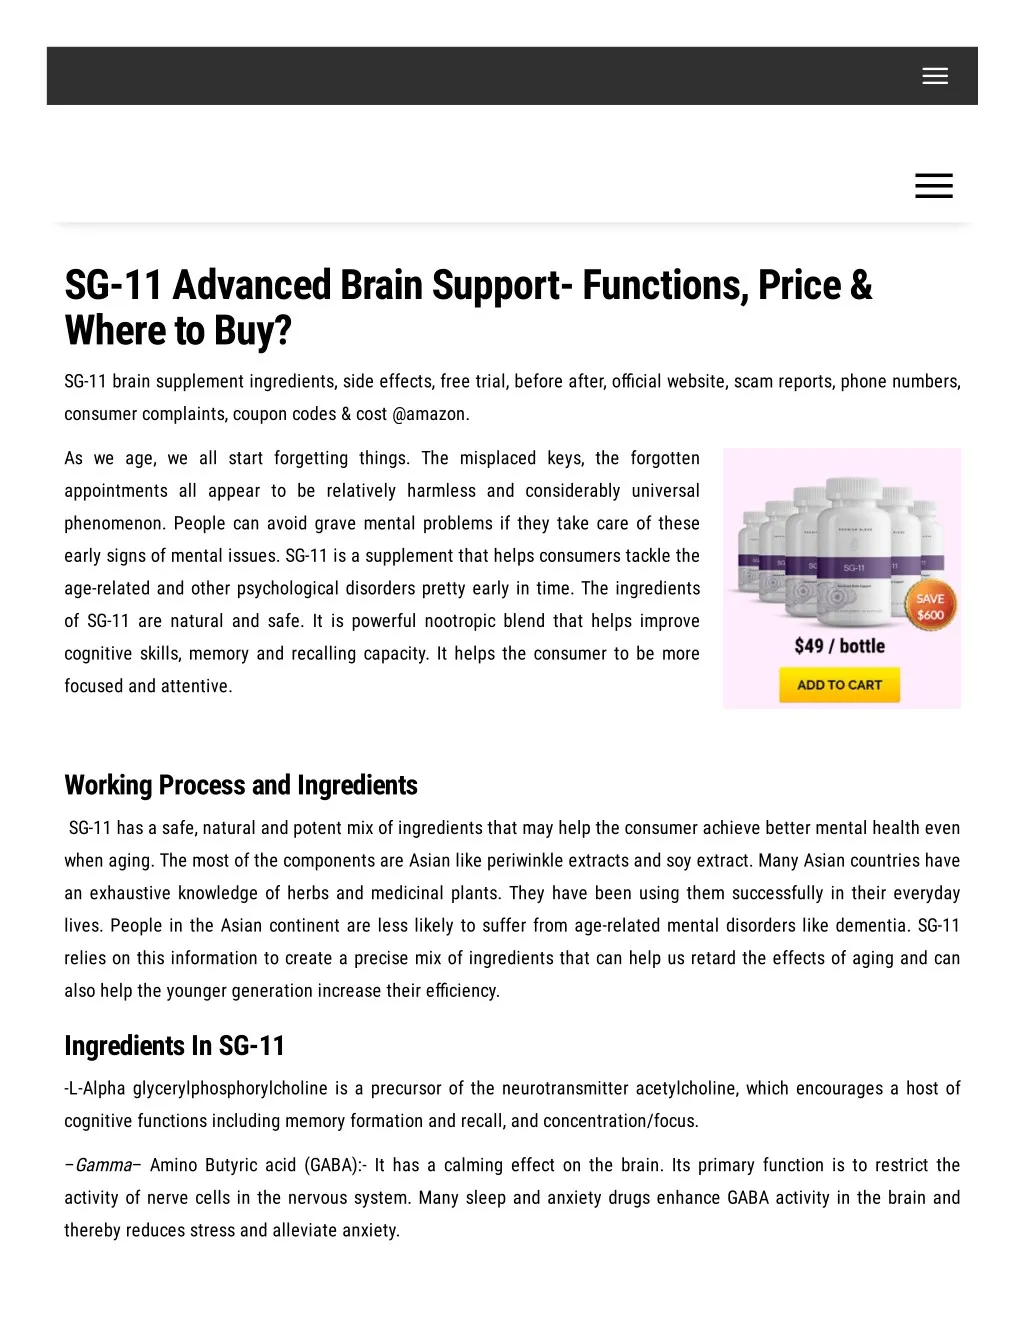 sg 11 advanced brain support functions price